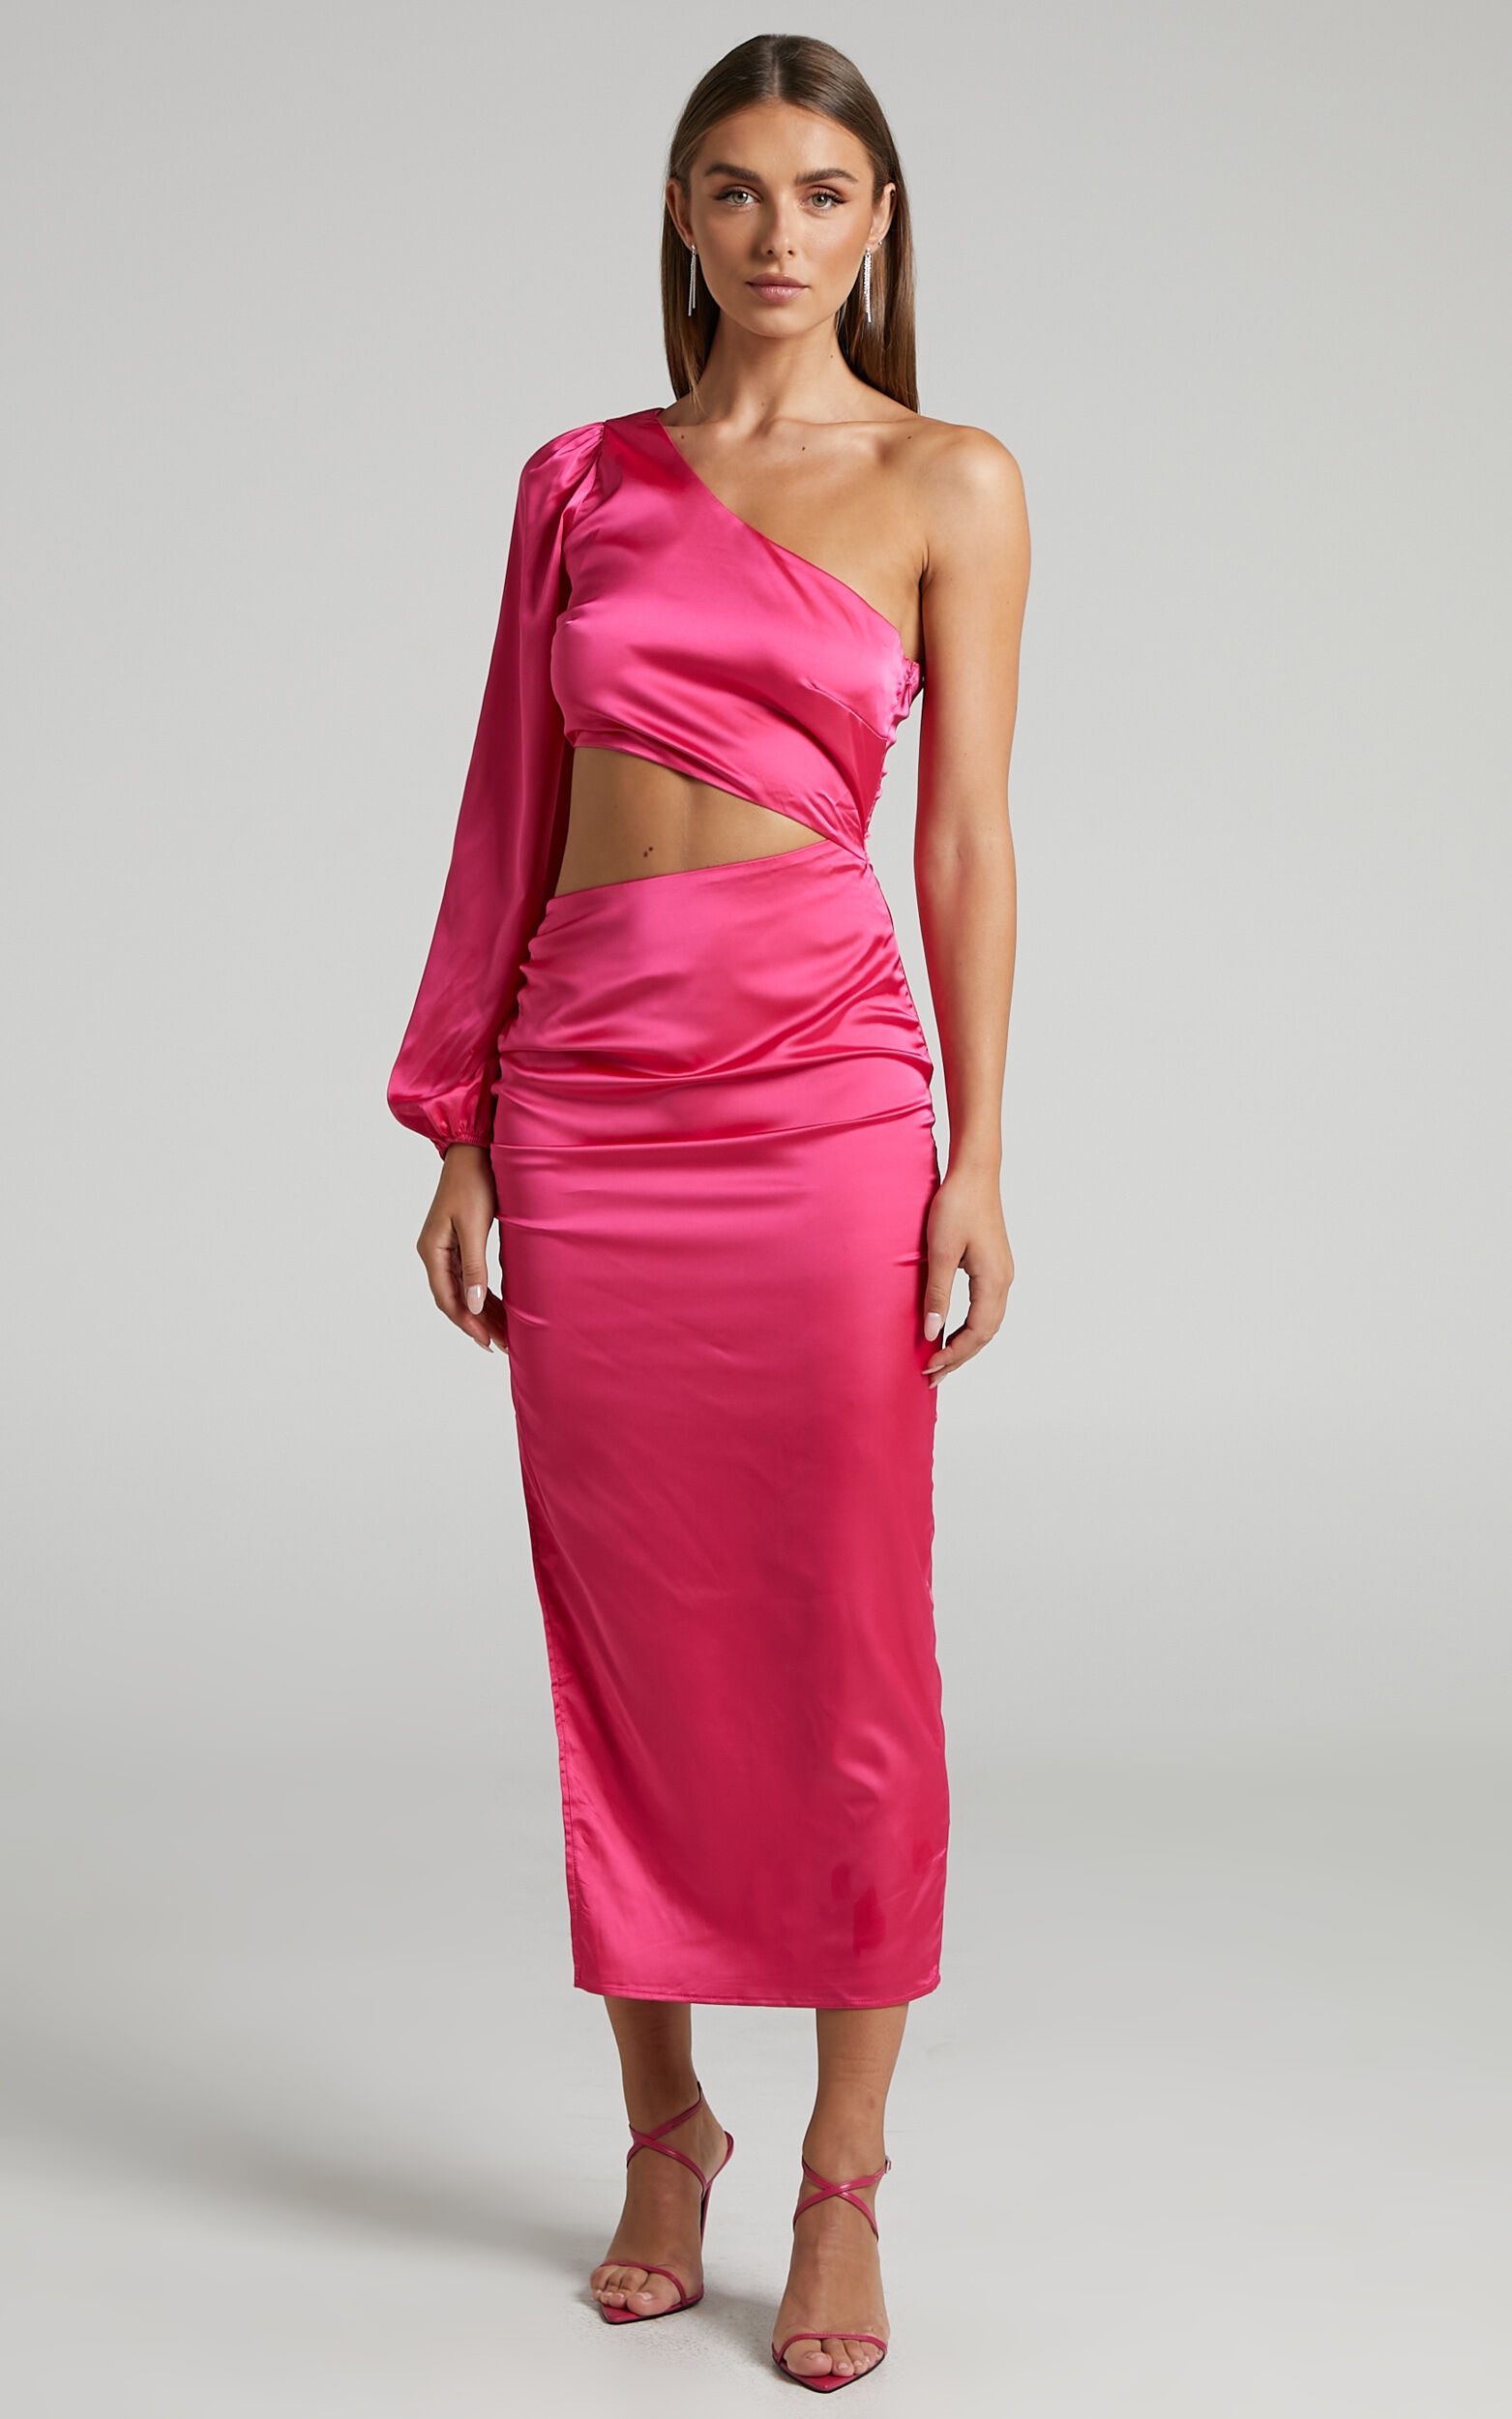 Runaway The Label - Christabel Dress in Fuchsia - M, PNK1, super-hi-res image number null